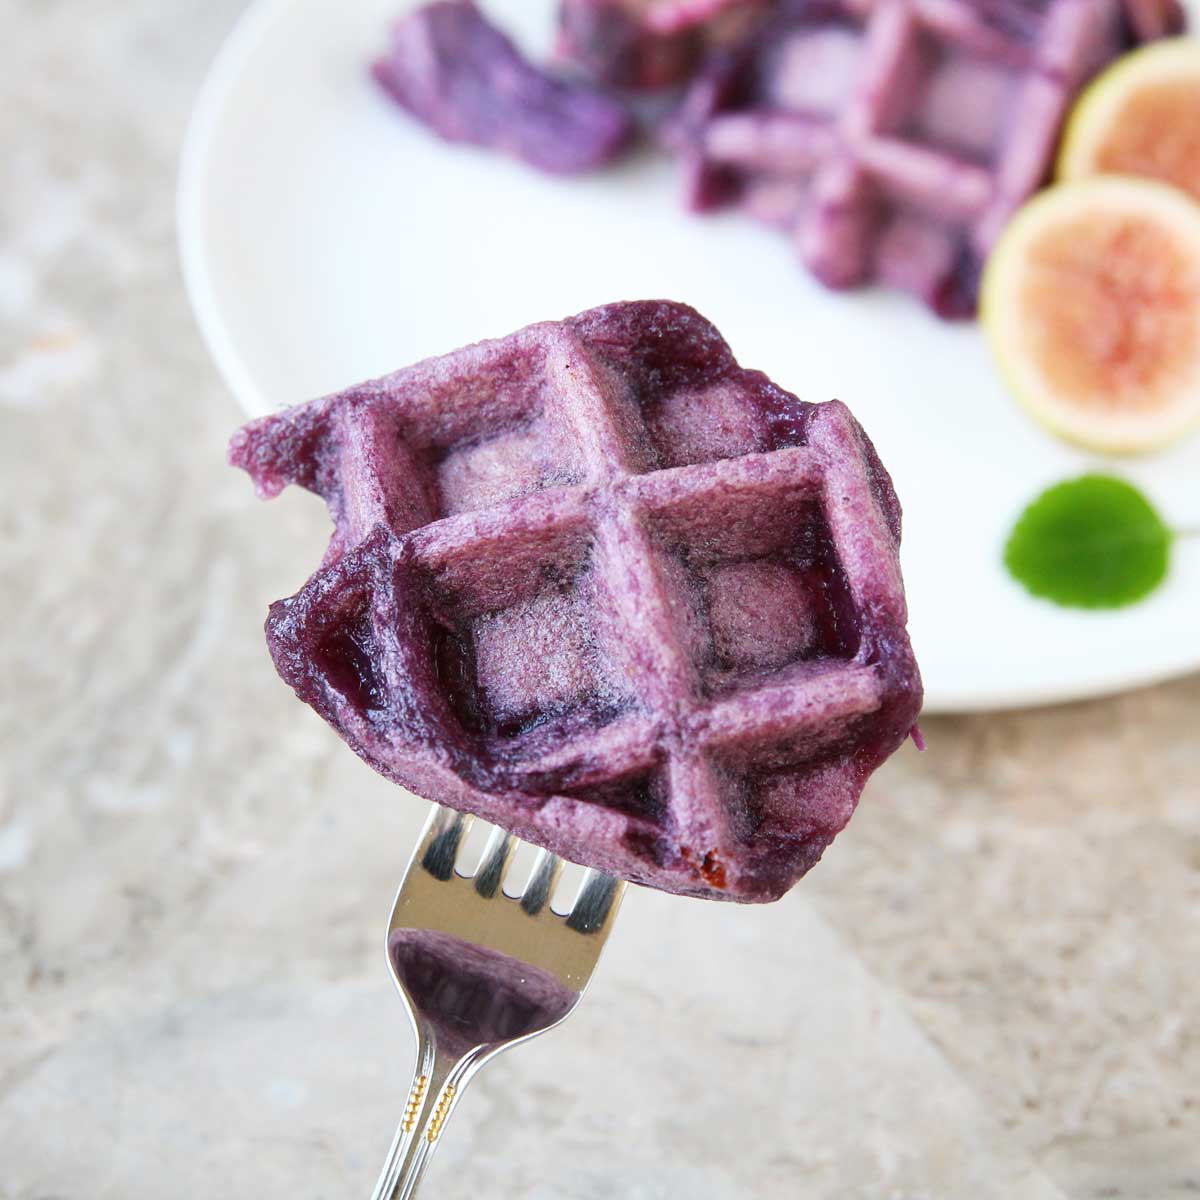 Making Homemade Blueberry Mochi Waffles from Scratch (Gluten-Free, Vegan) - Blueberry Mochi Waffles